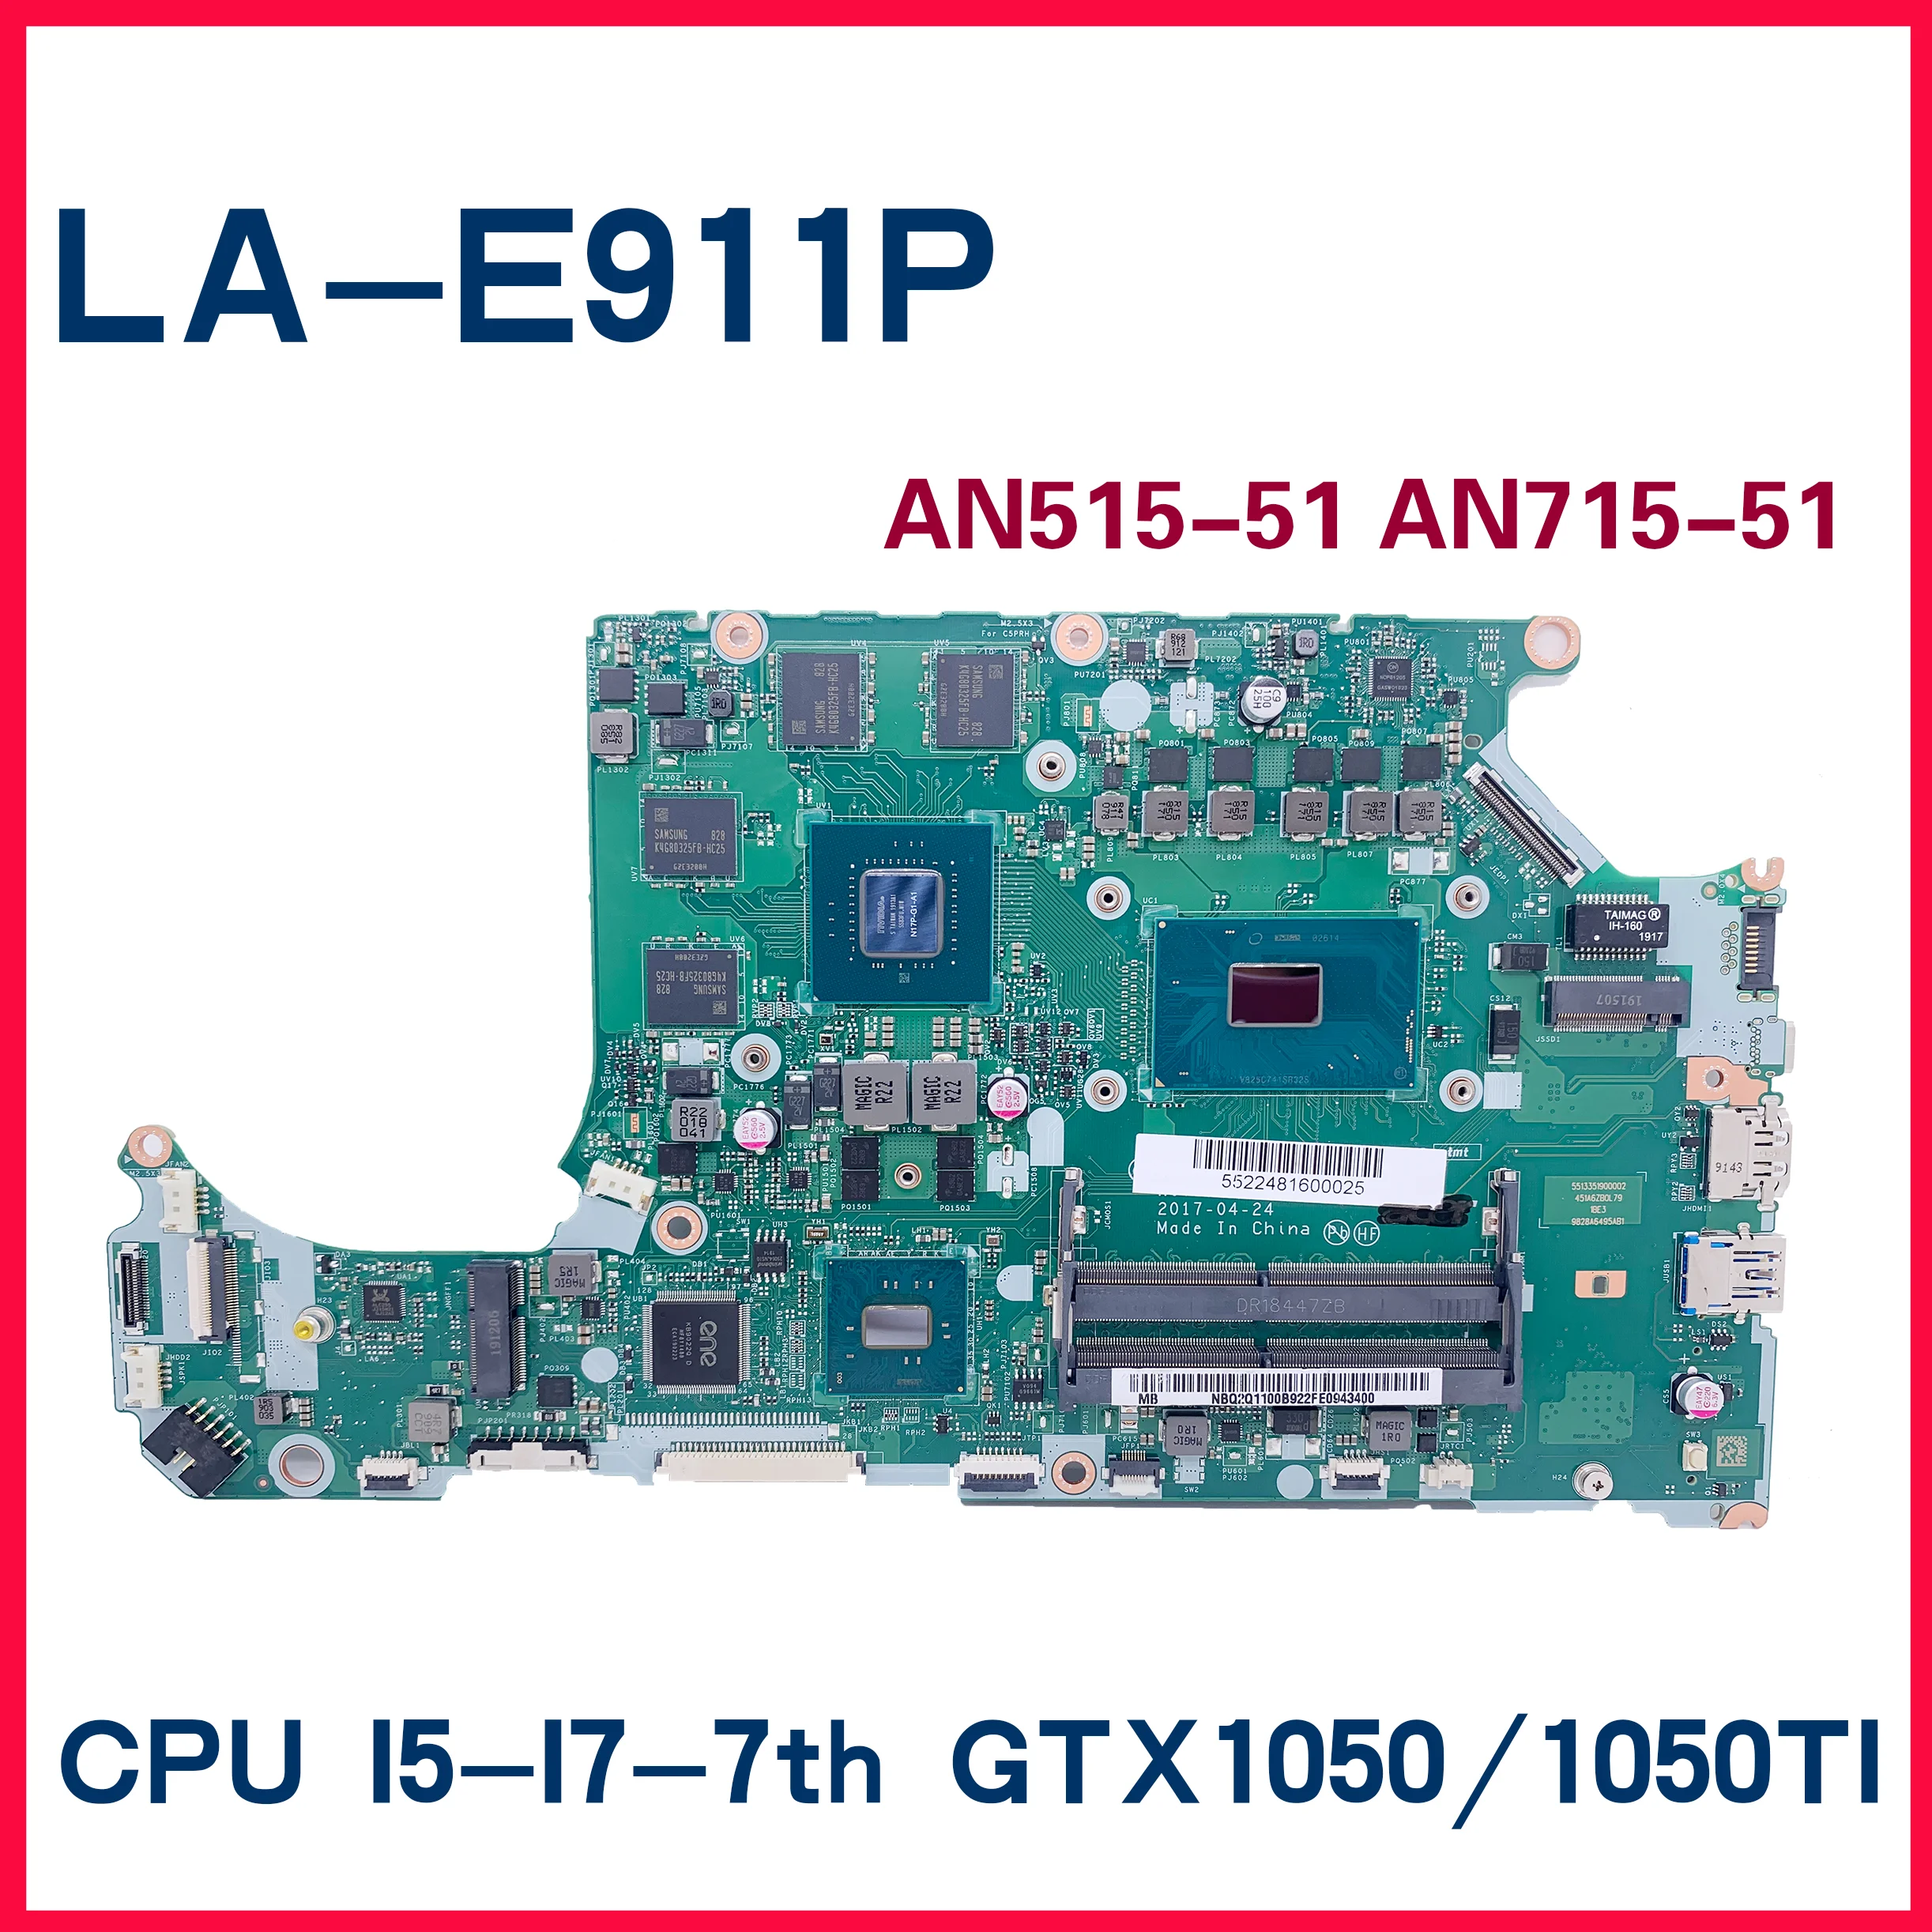 

LA-E911P Motherboard For ACER Aspire AN515-51 A715-71G Laptop Mainboard With I5-7300HQ I7-7700HQ GTX1050 GTX1050TI 100% Test OK